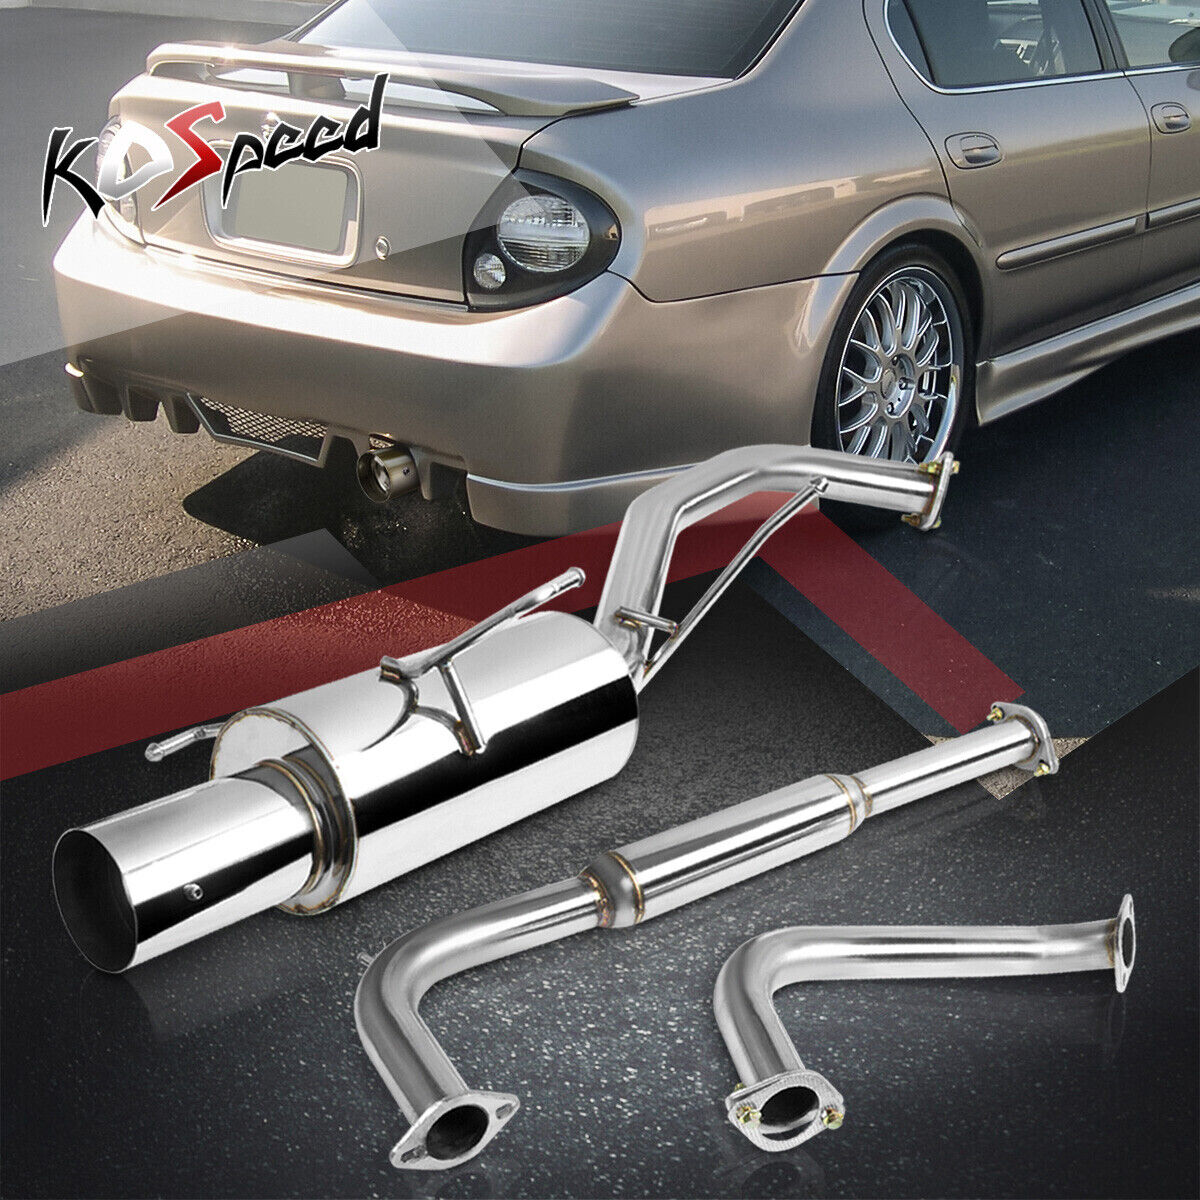 T304 STAINLESS PERFORMANCE CATBACK EXHAUST SYSTEM FOR NISSAN MAXIMA V6+BOLT